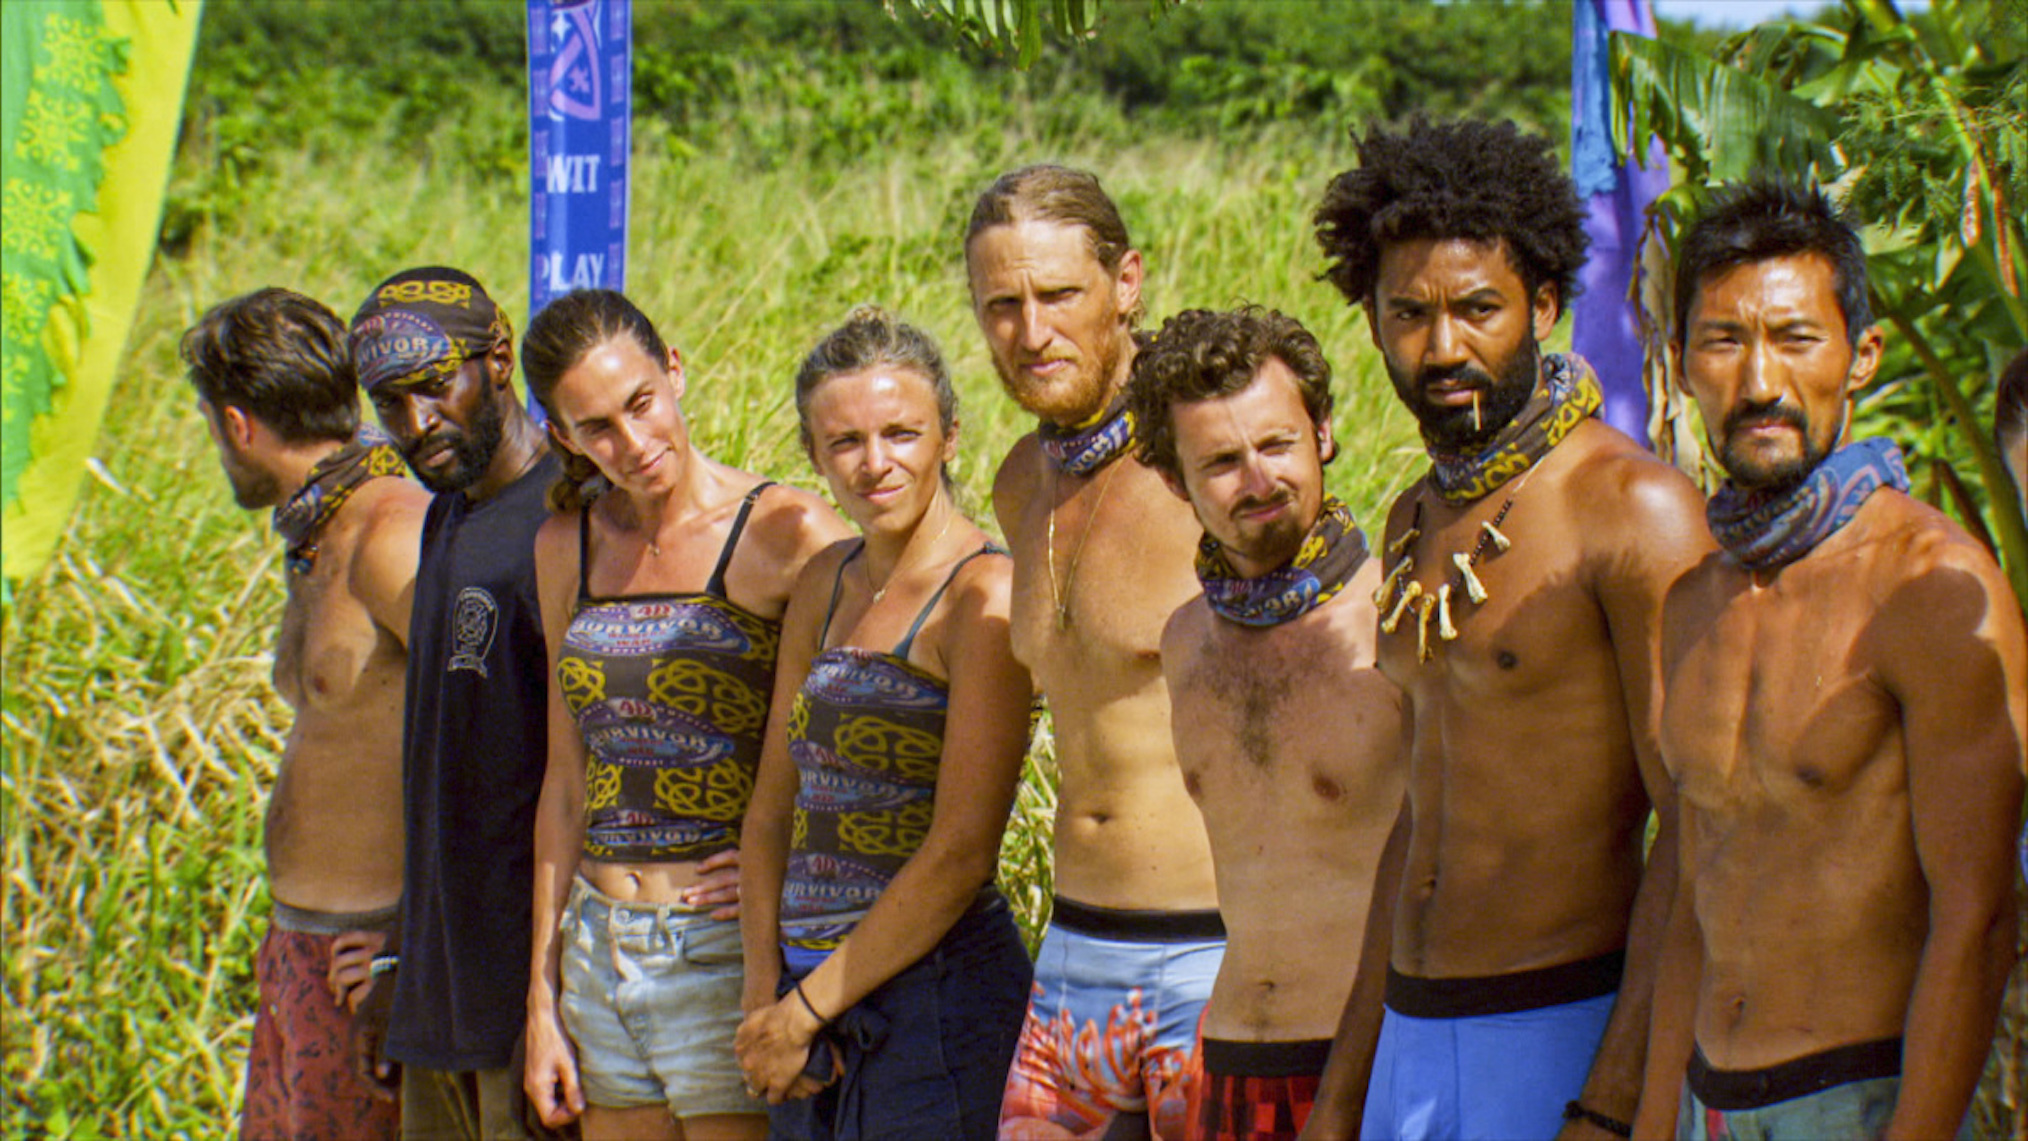 20 Years of 'Survivor' How Did 'Winners at War' Change the Scope of the Game?